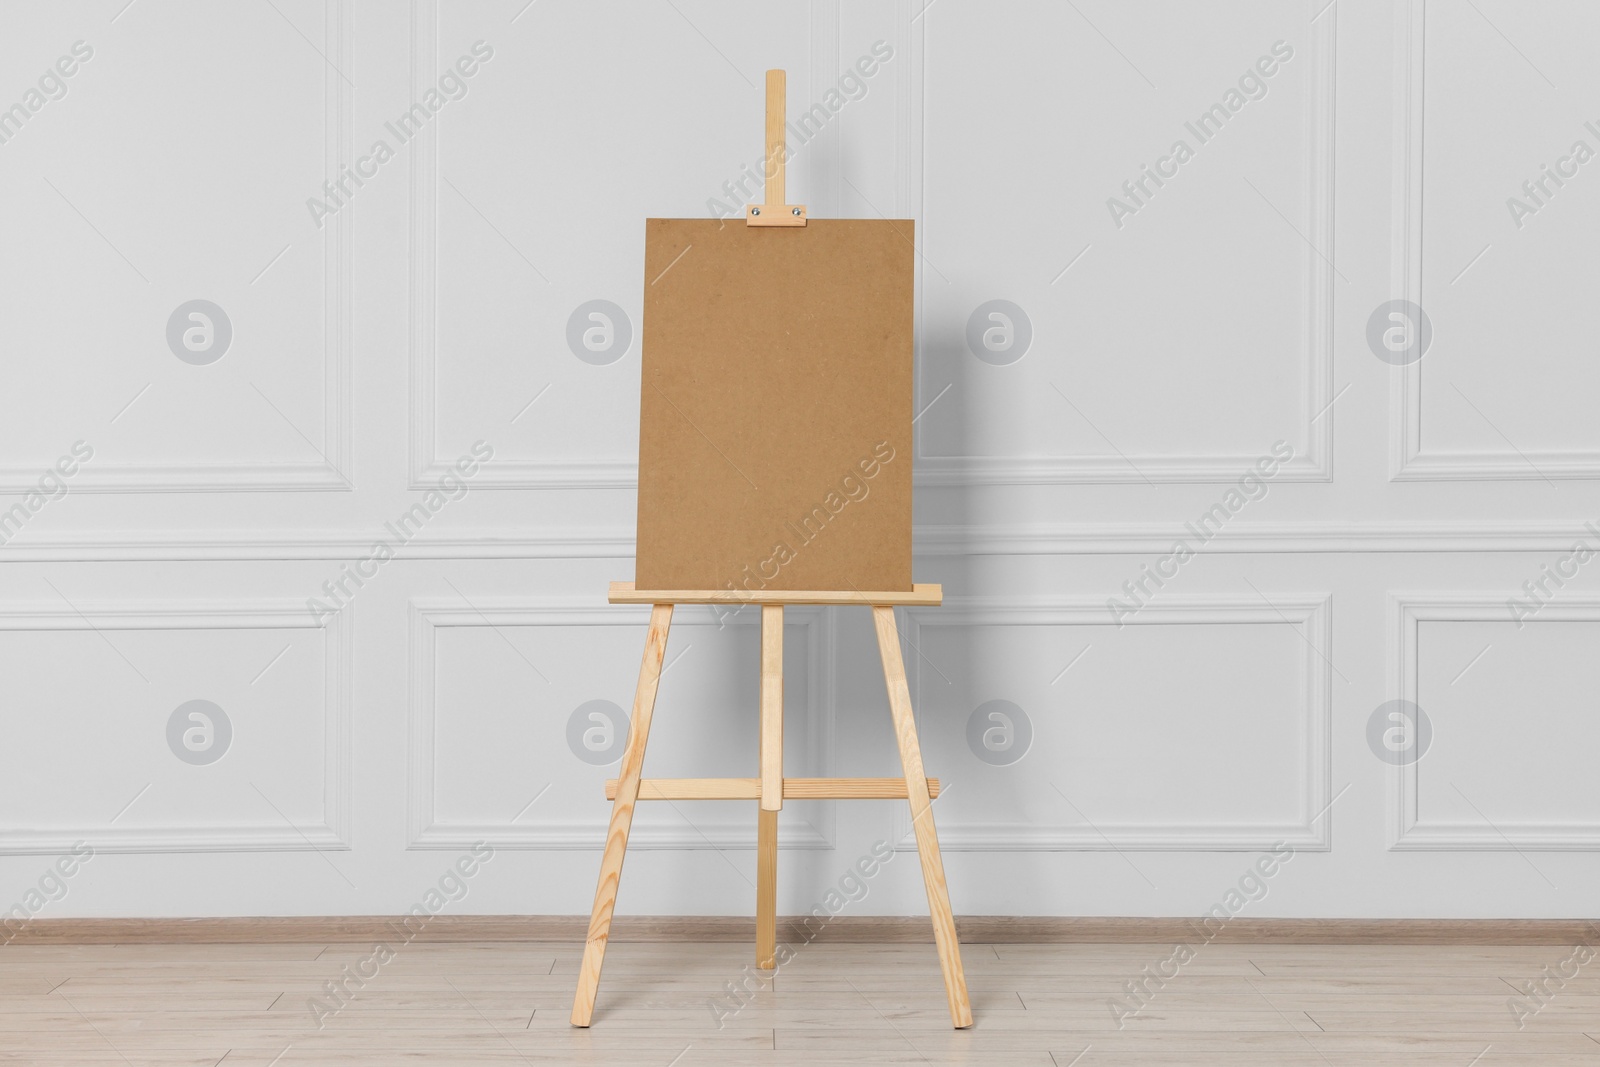 Photo of Wooden easel with blank board near white wall indoors